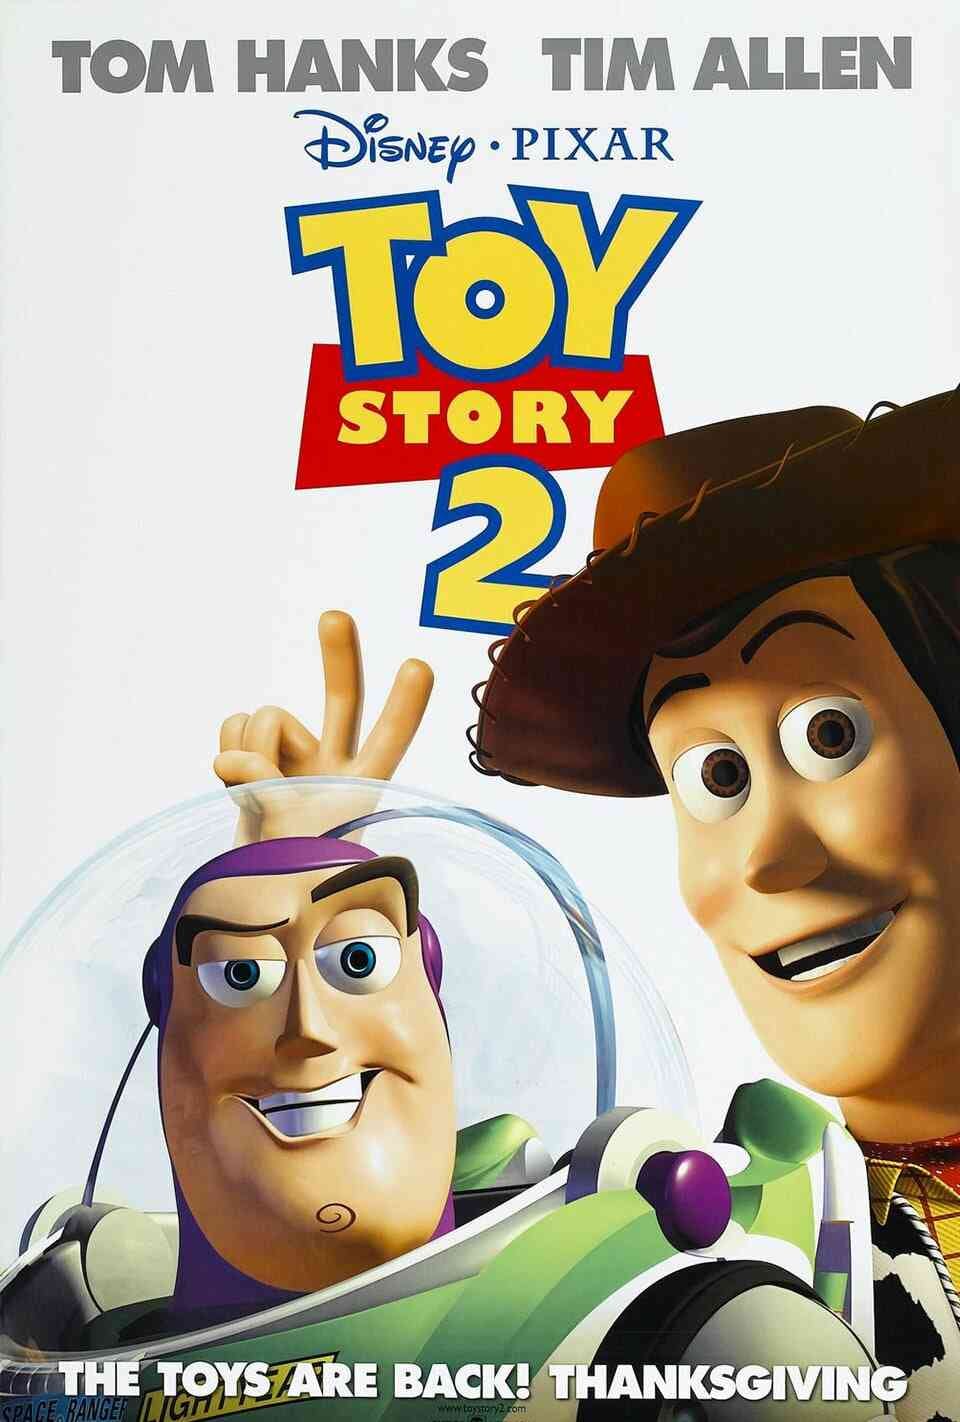 Read Toy Story 2 screenplay.